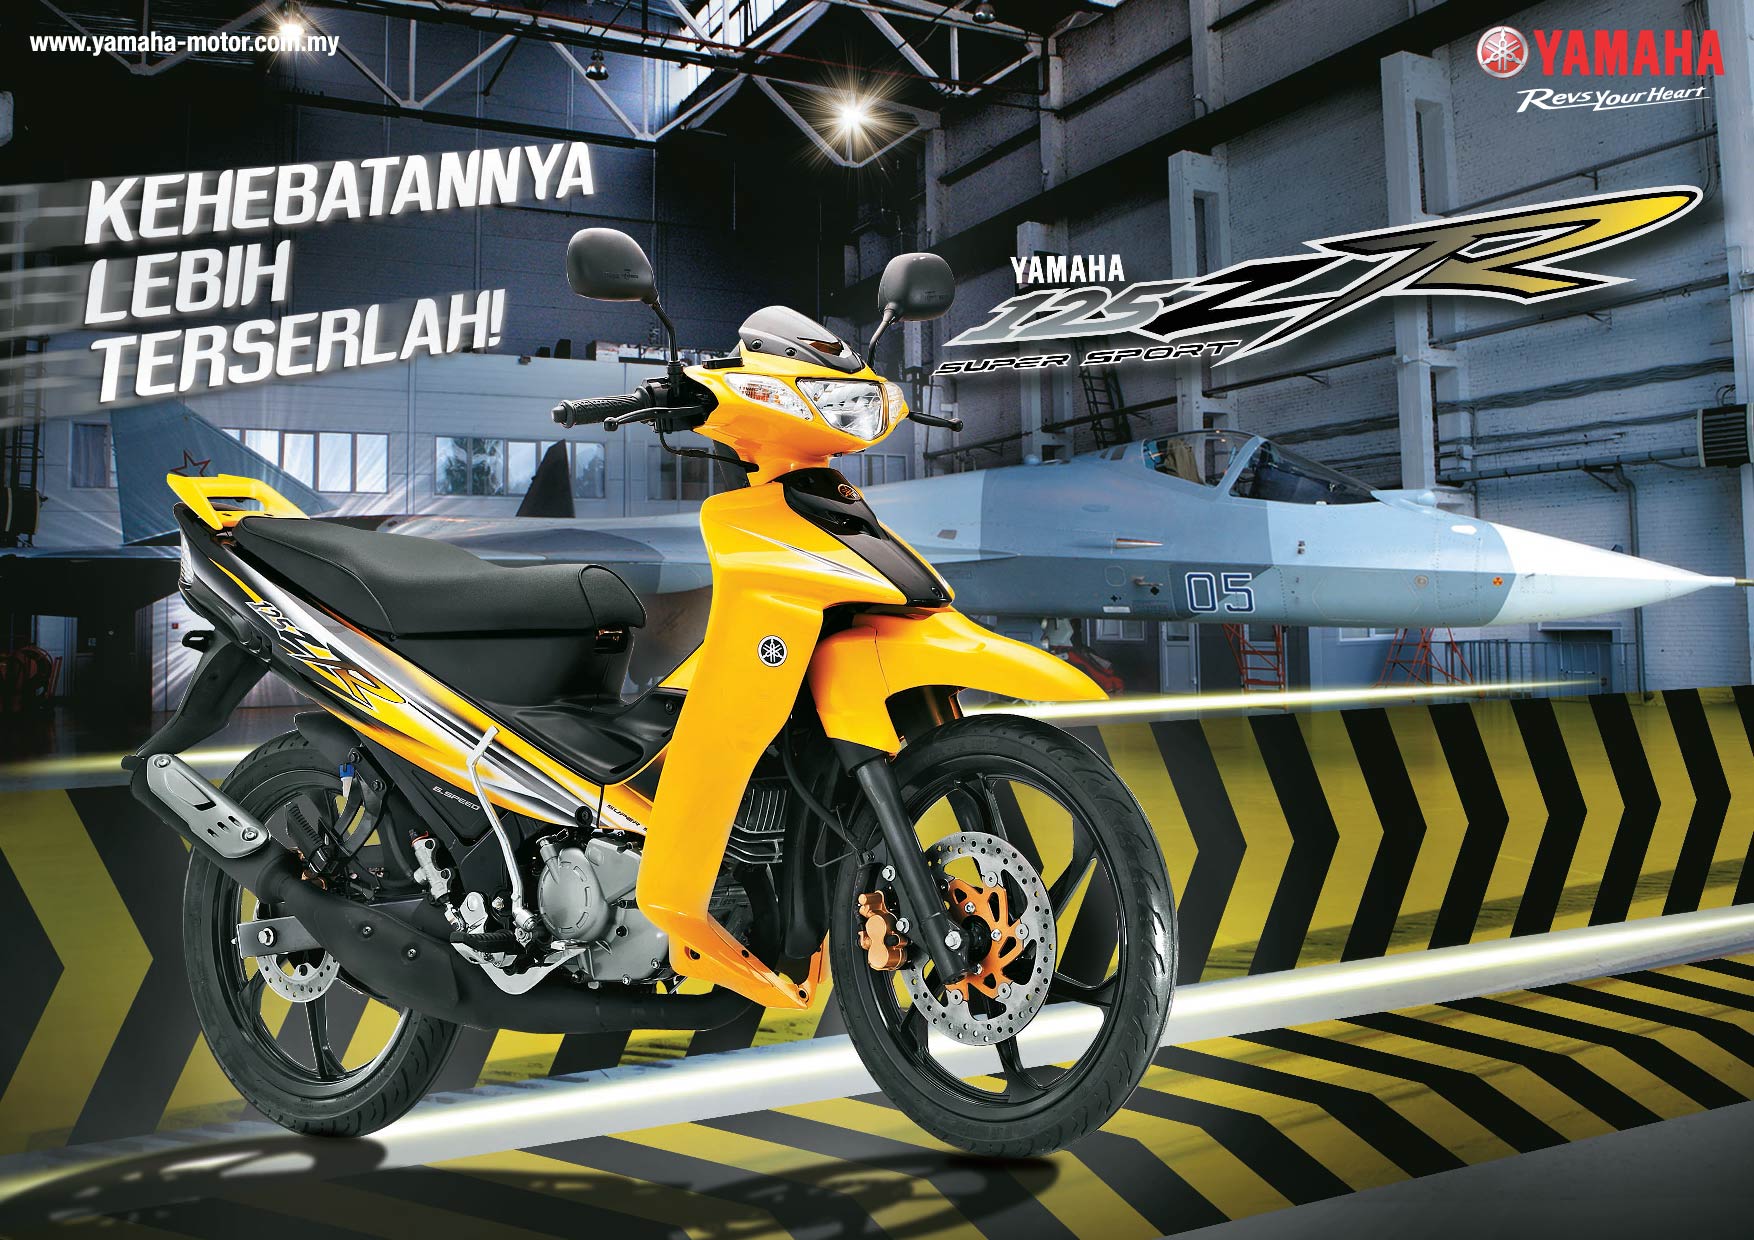 2016 Yamaha 125ZR Now In Yellow Colour RM7269